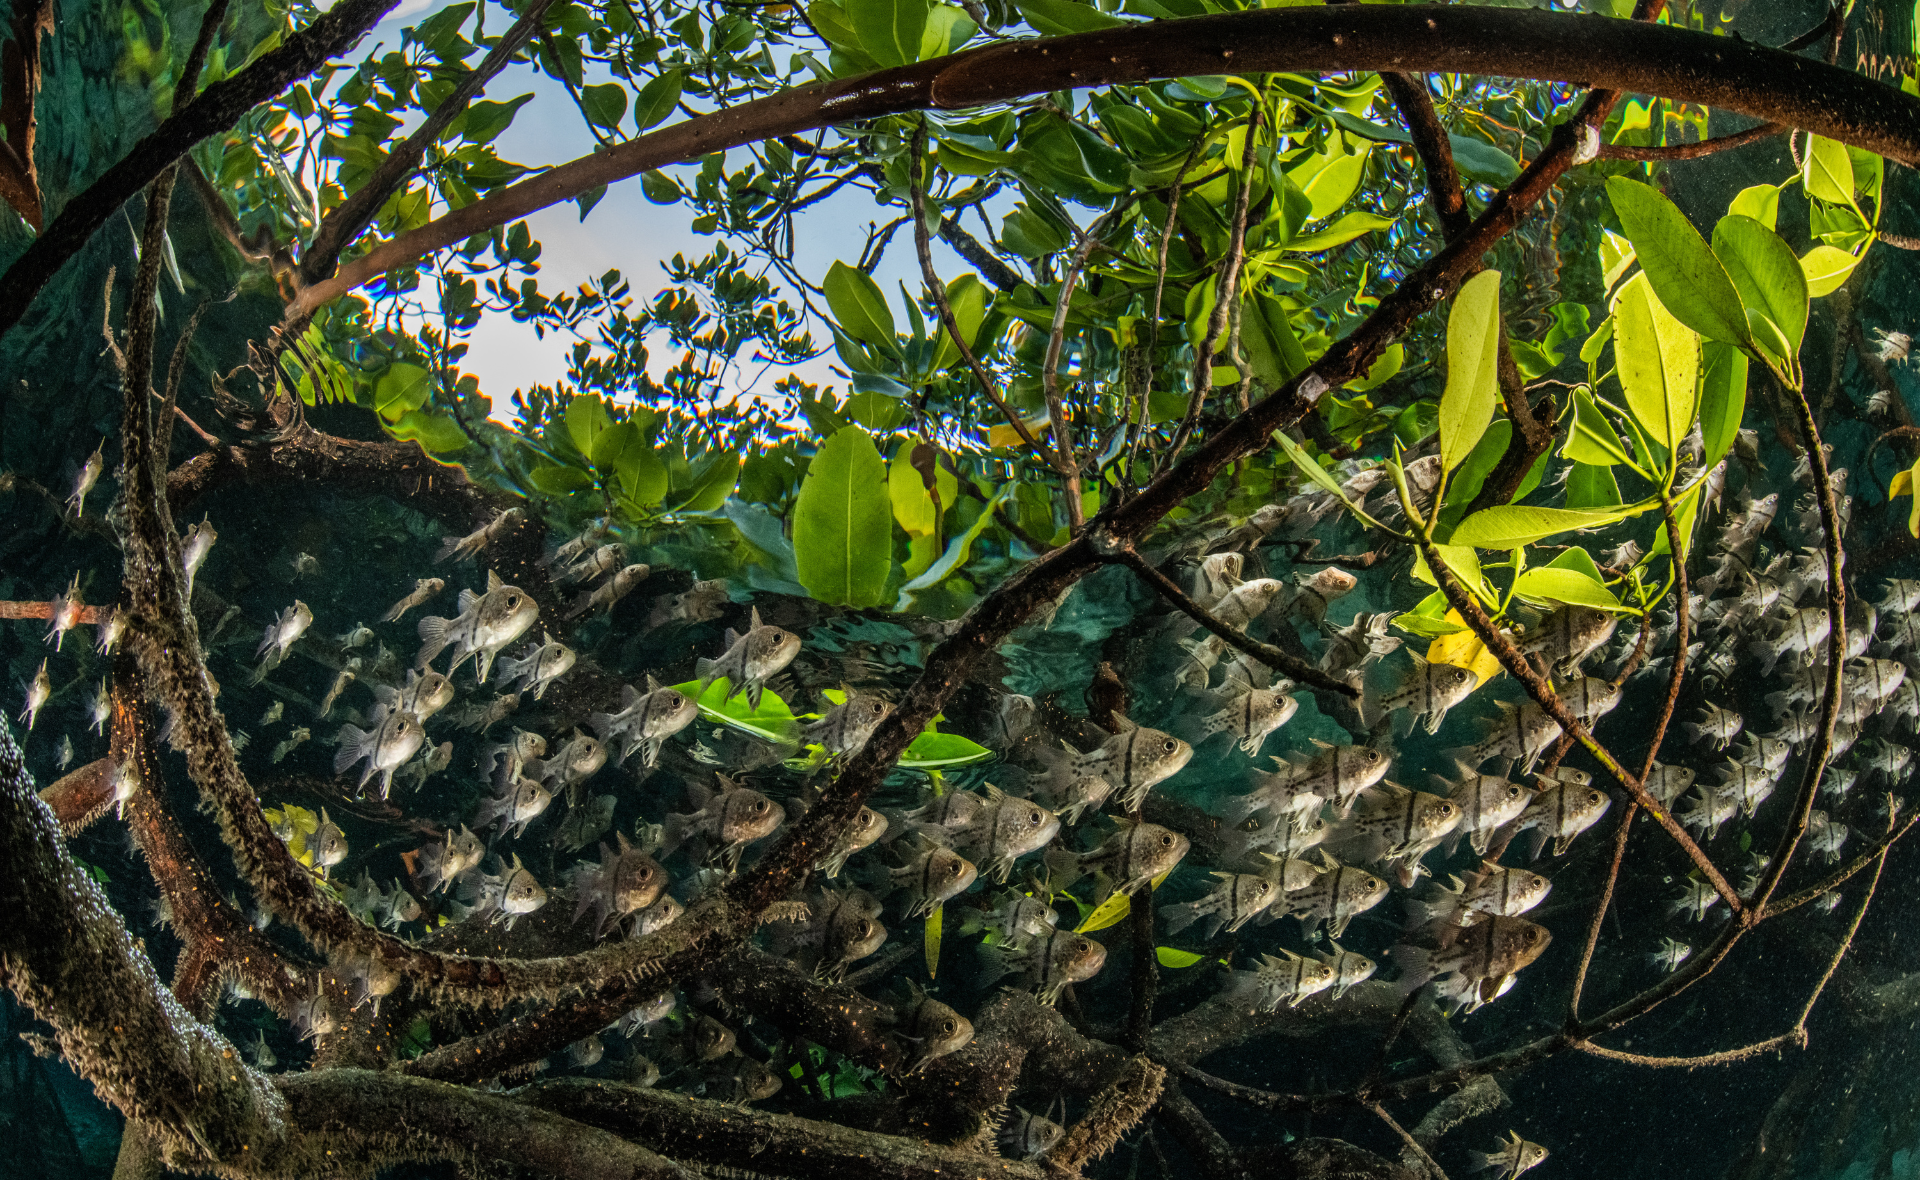 A group of small fish swim among winding mangrove trees with bright green leaves